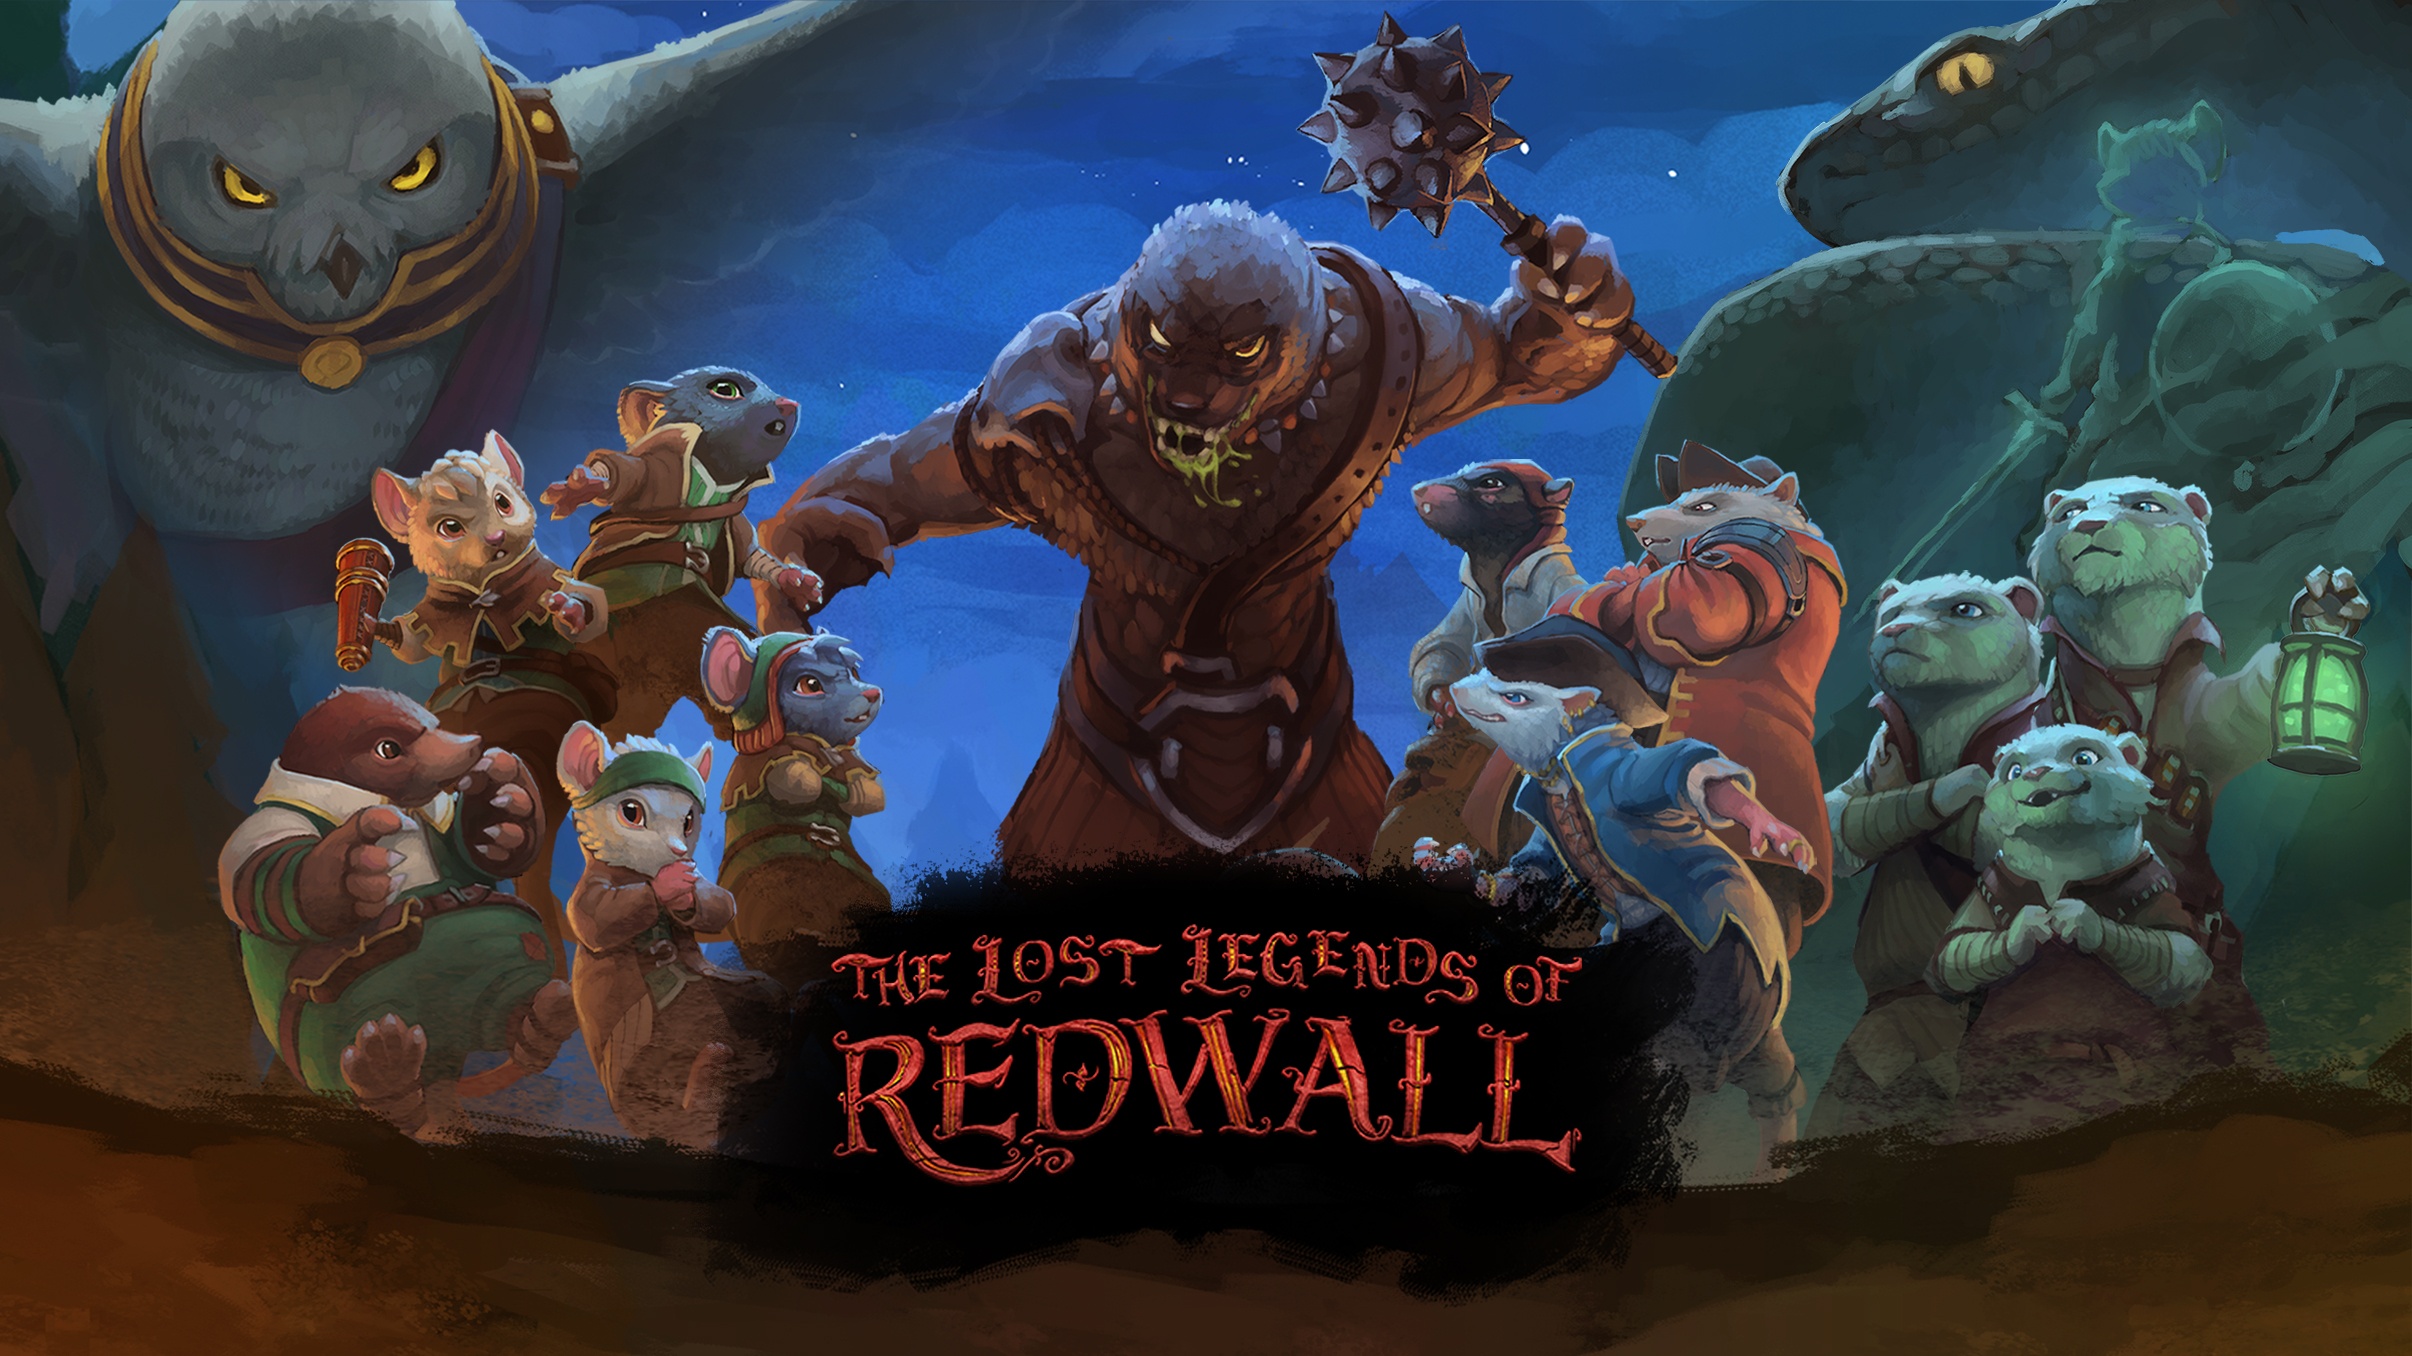 The lost legends of redwall. The Lost Legends of Redwall Asmodeus.